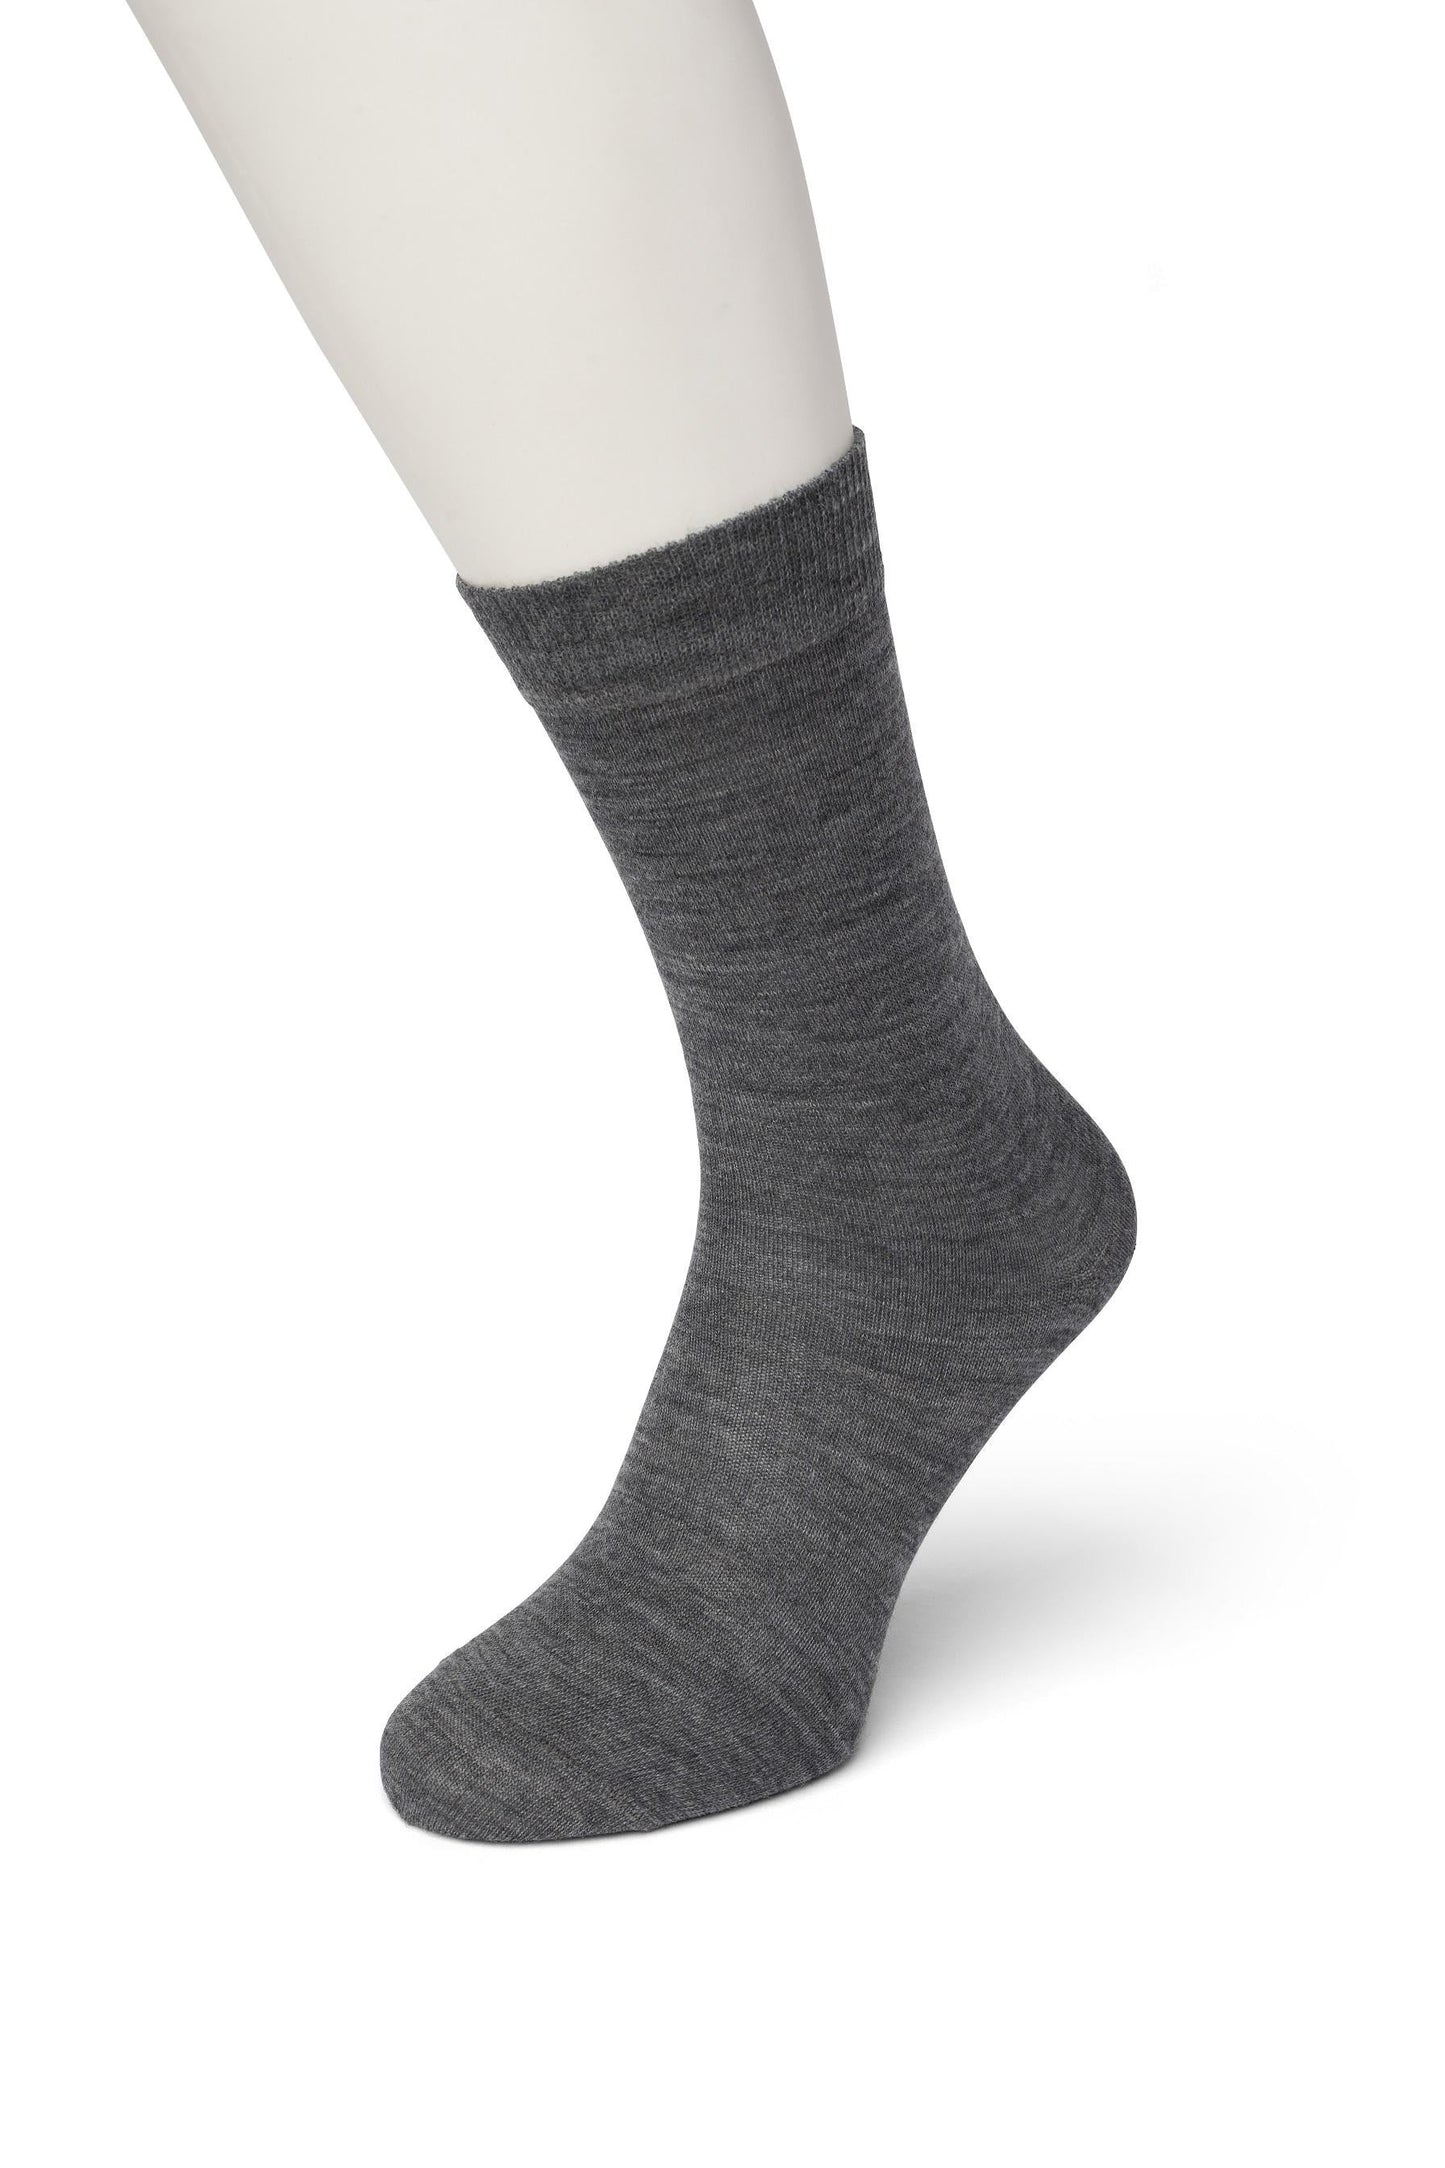 Bonnie Doon Wool/Cotton Sock BD631402 - grey (medium heather grey) warm thermal ankle socks perfect for the cold Winter weather